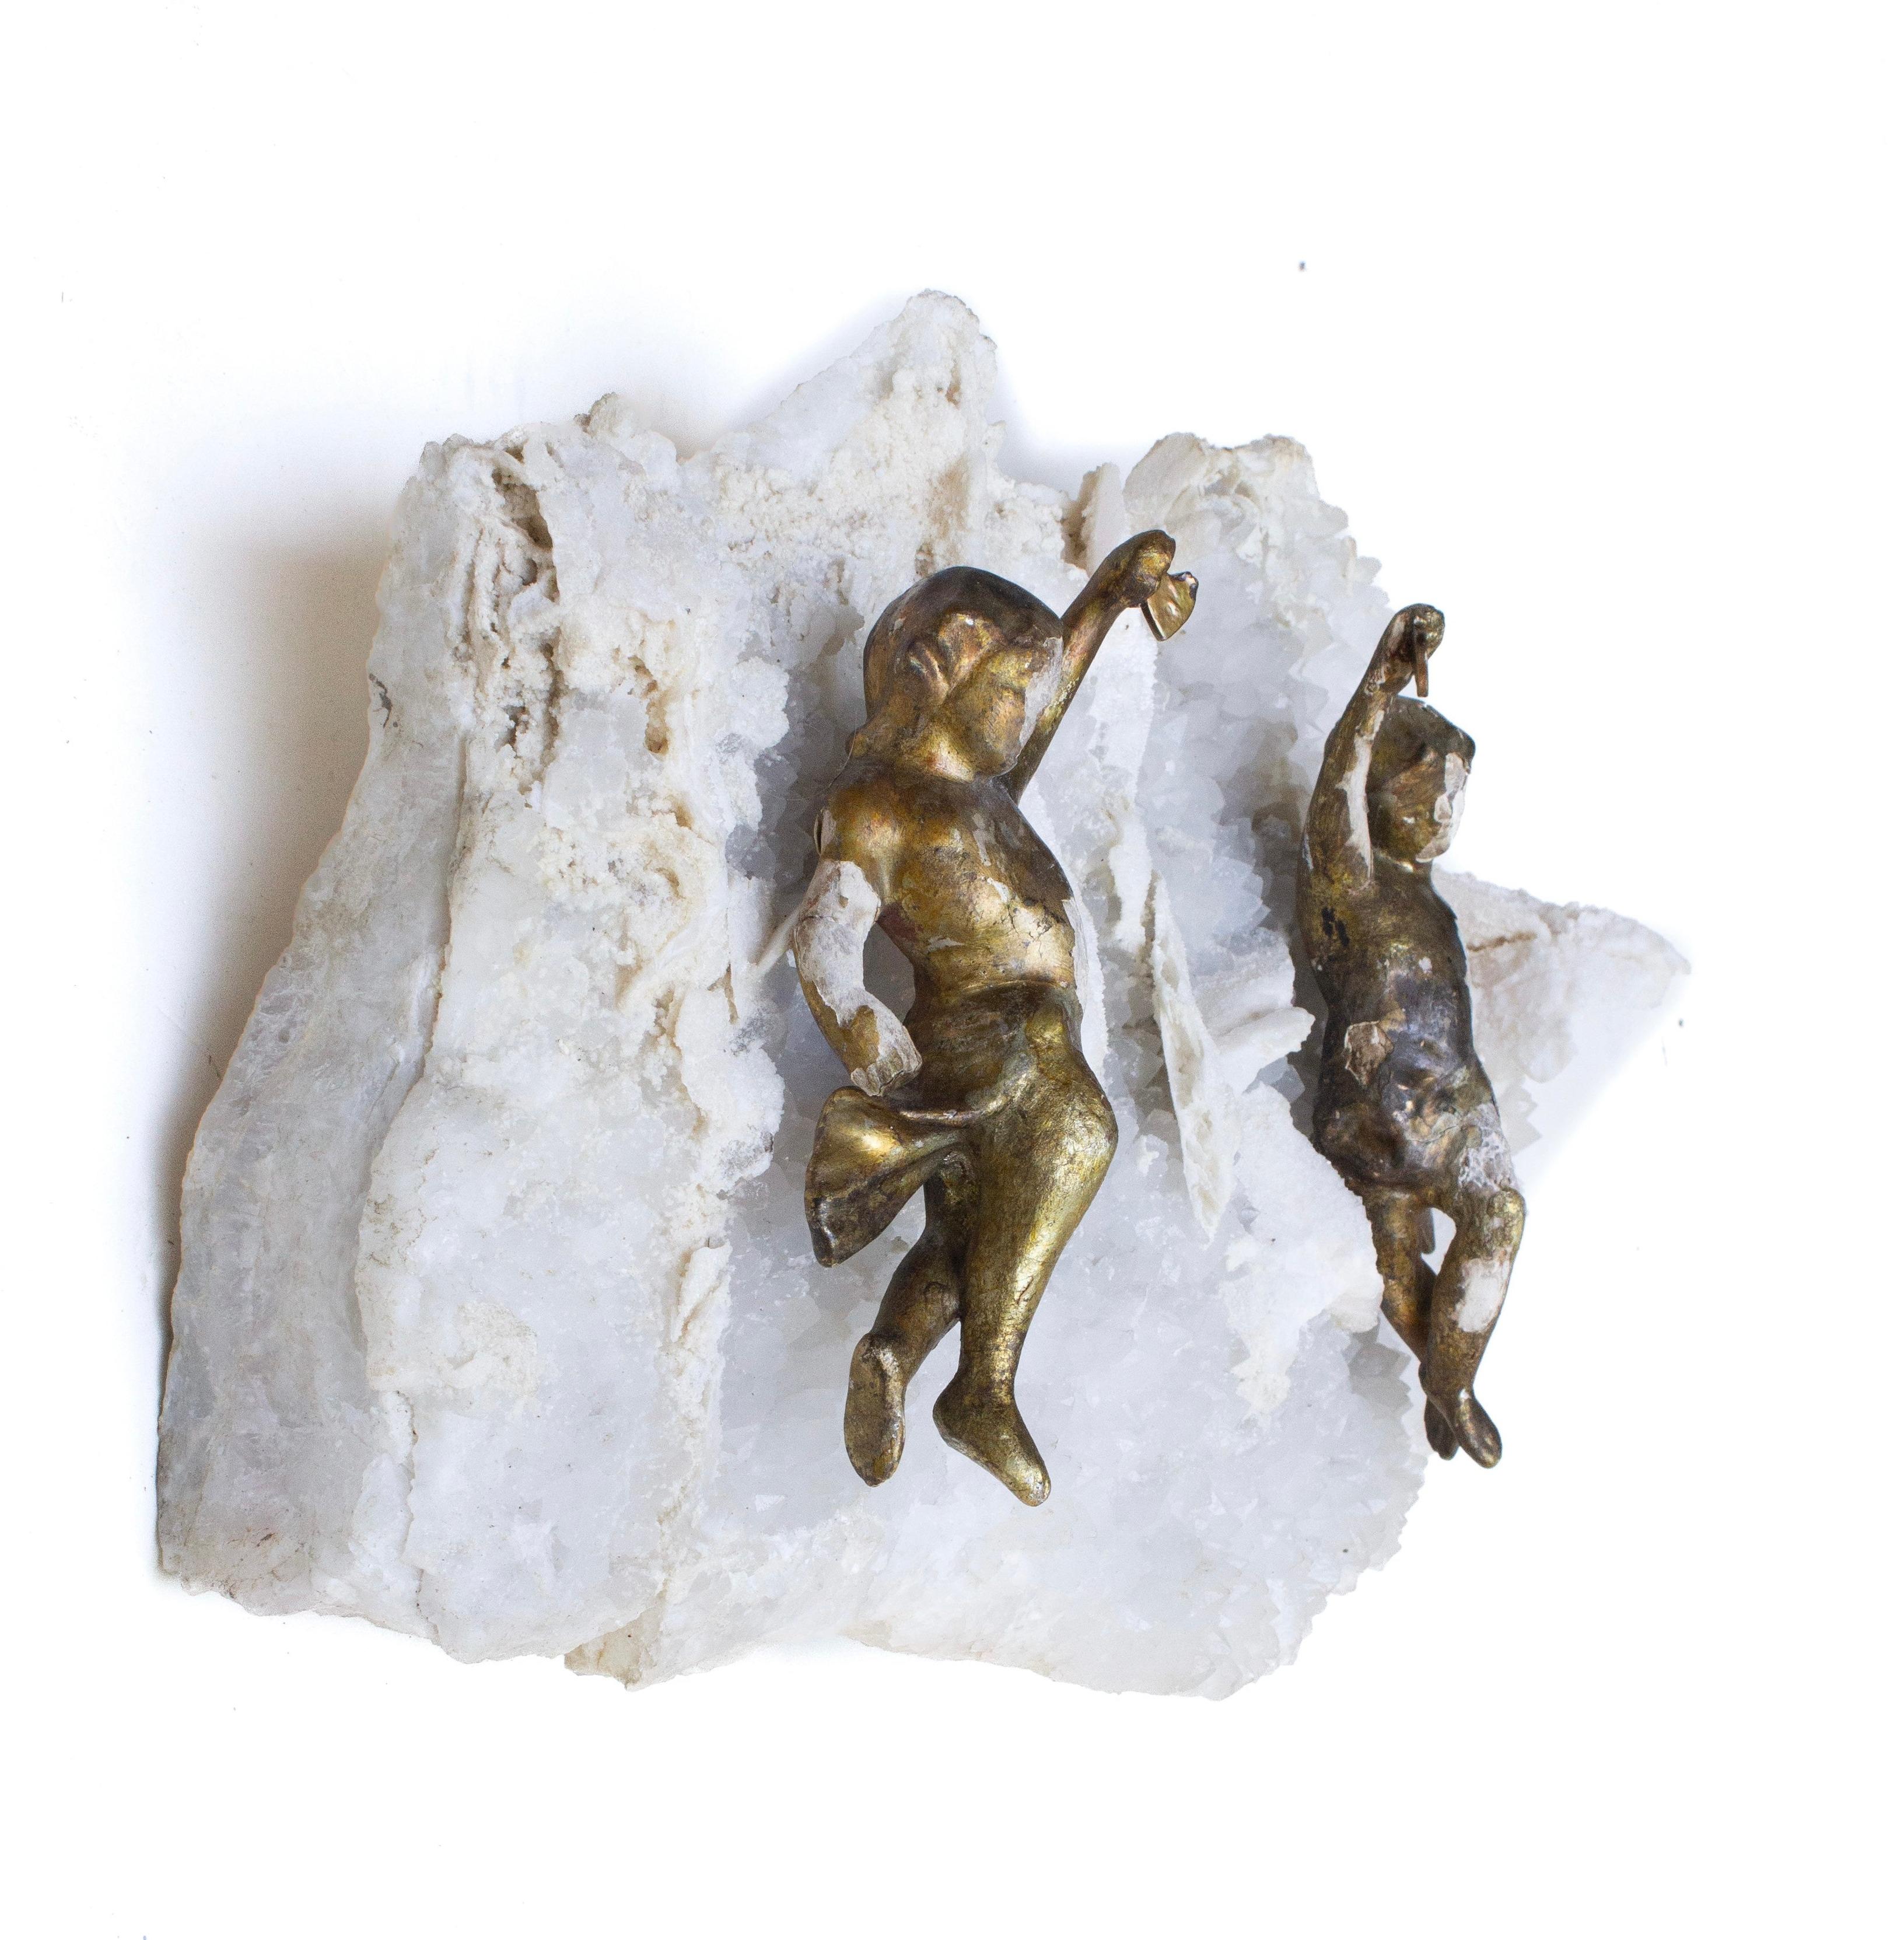 Hand-Carved 18th Century Italian Gilded Angels on Amethyst and Calcite in Matrix For Sale